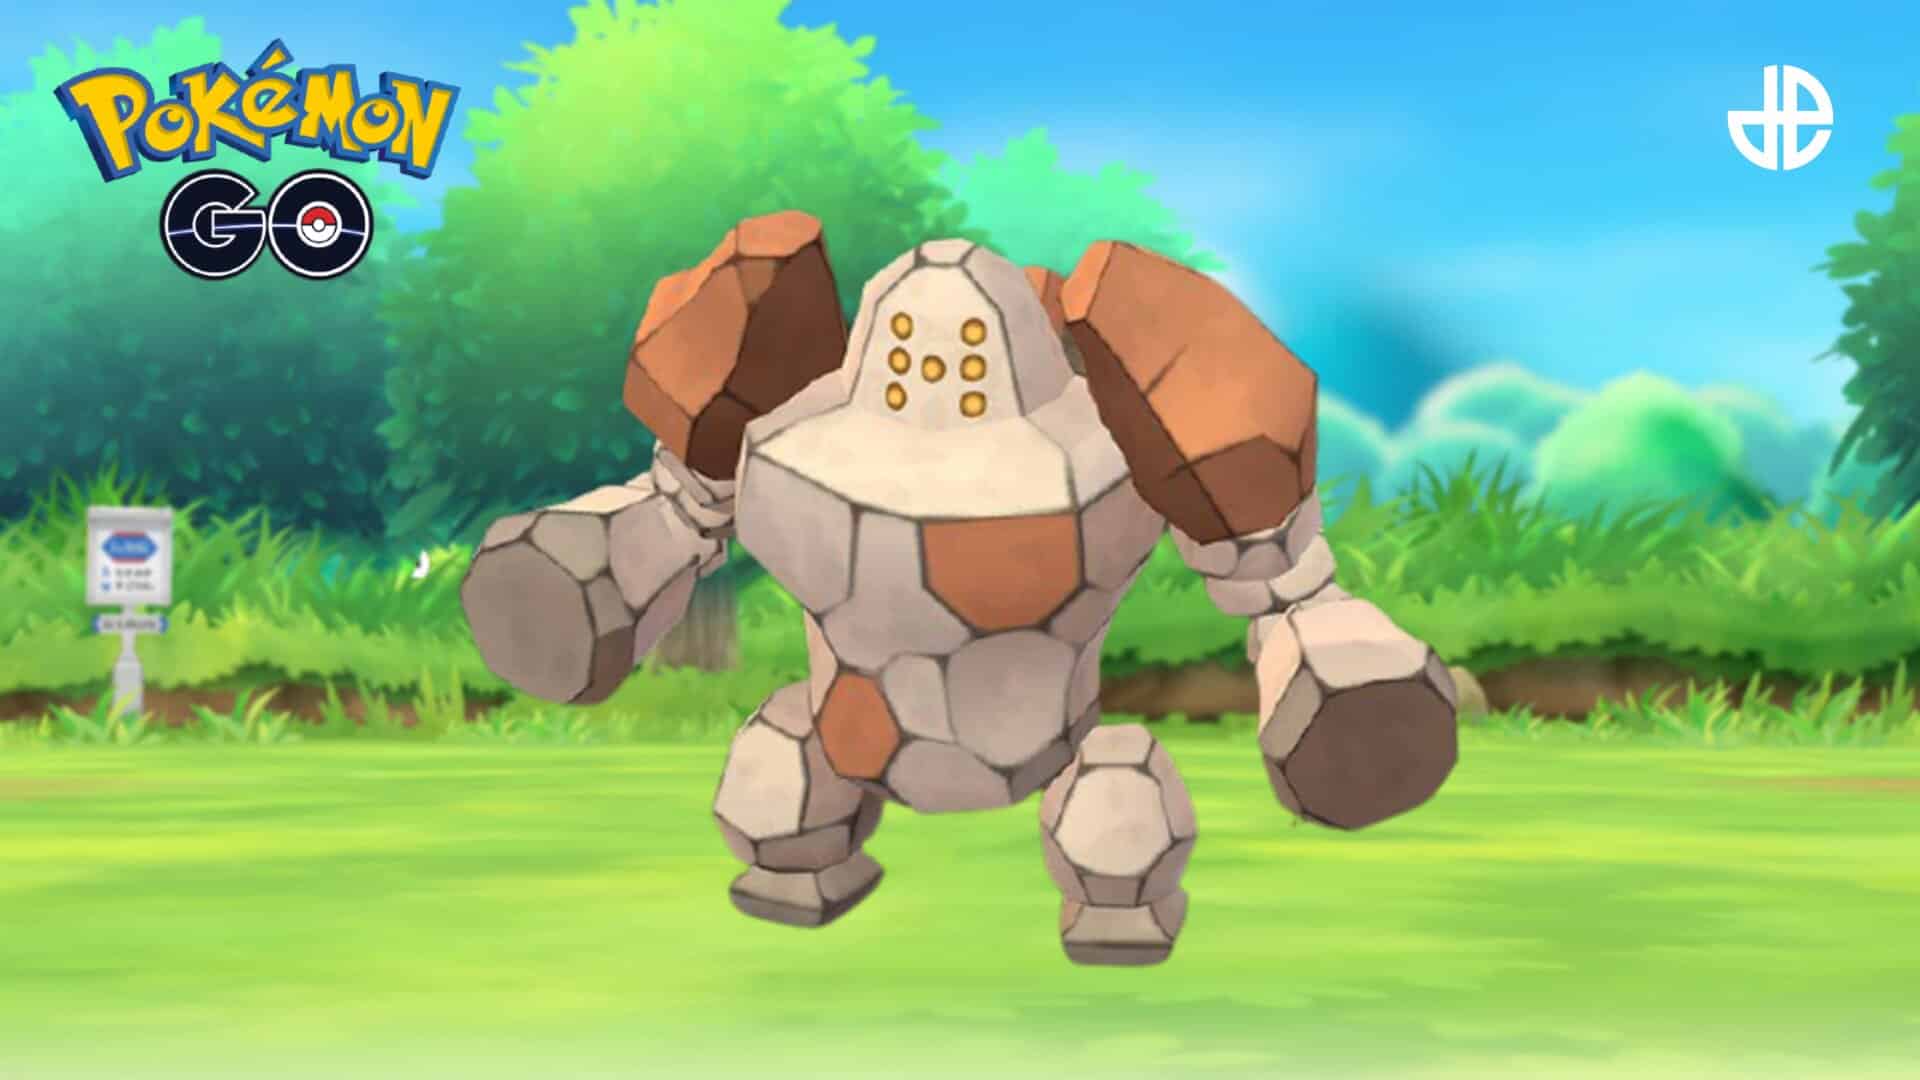 Regirock on a background with grass, trees, and the Pokemon Go logo